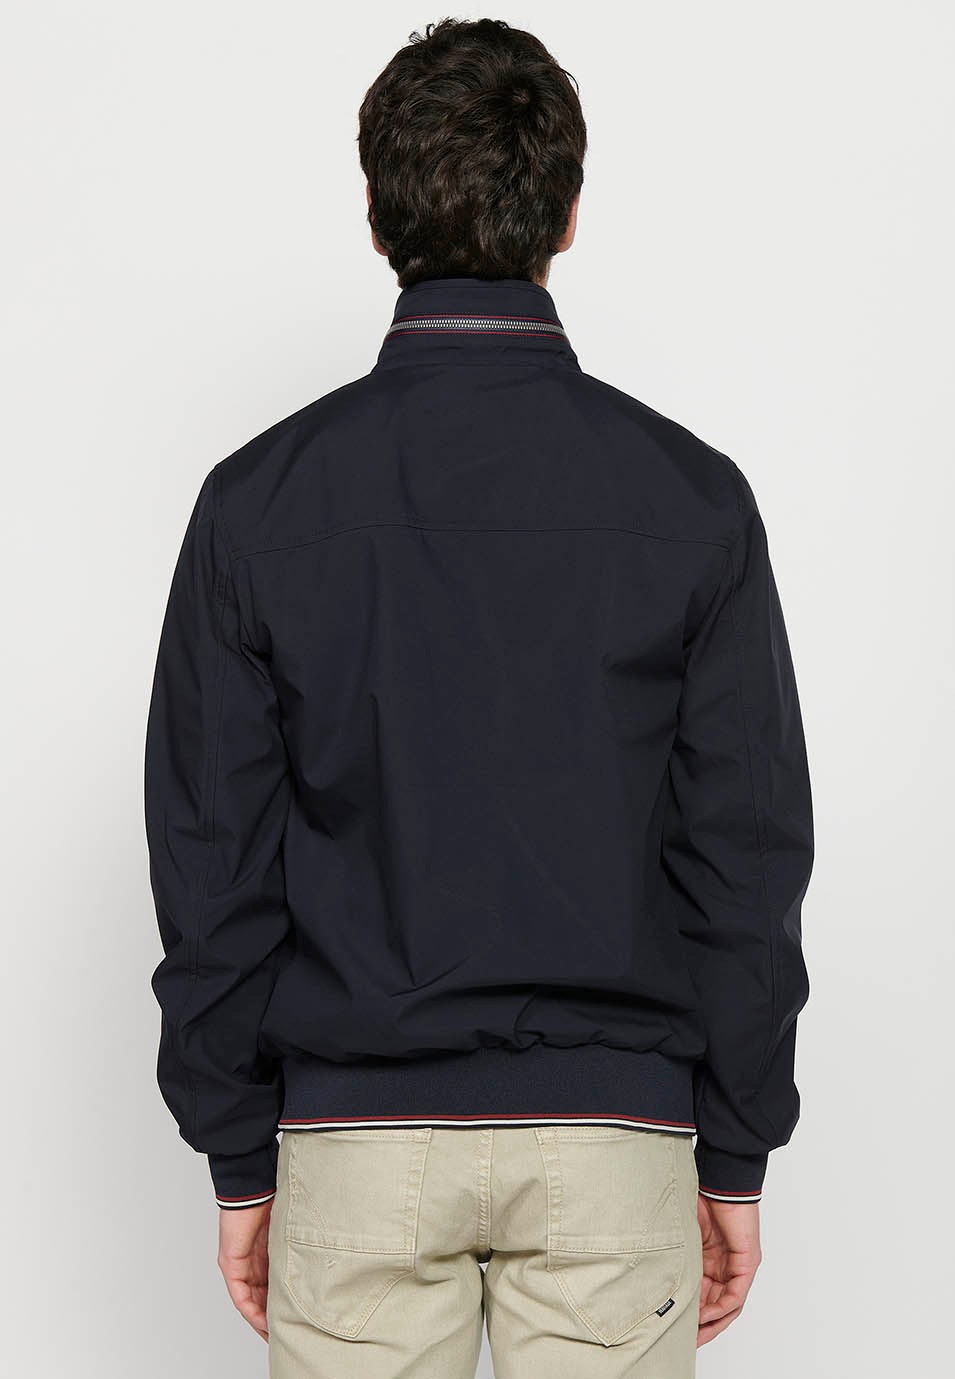 Long-sleeved high-neck jacket with front zipper closure and ribbed finishes with pockets, one inside in Navy for Men 8